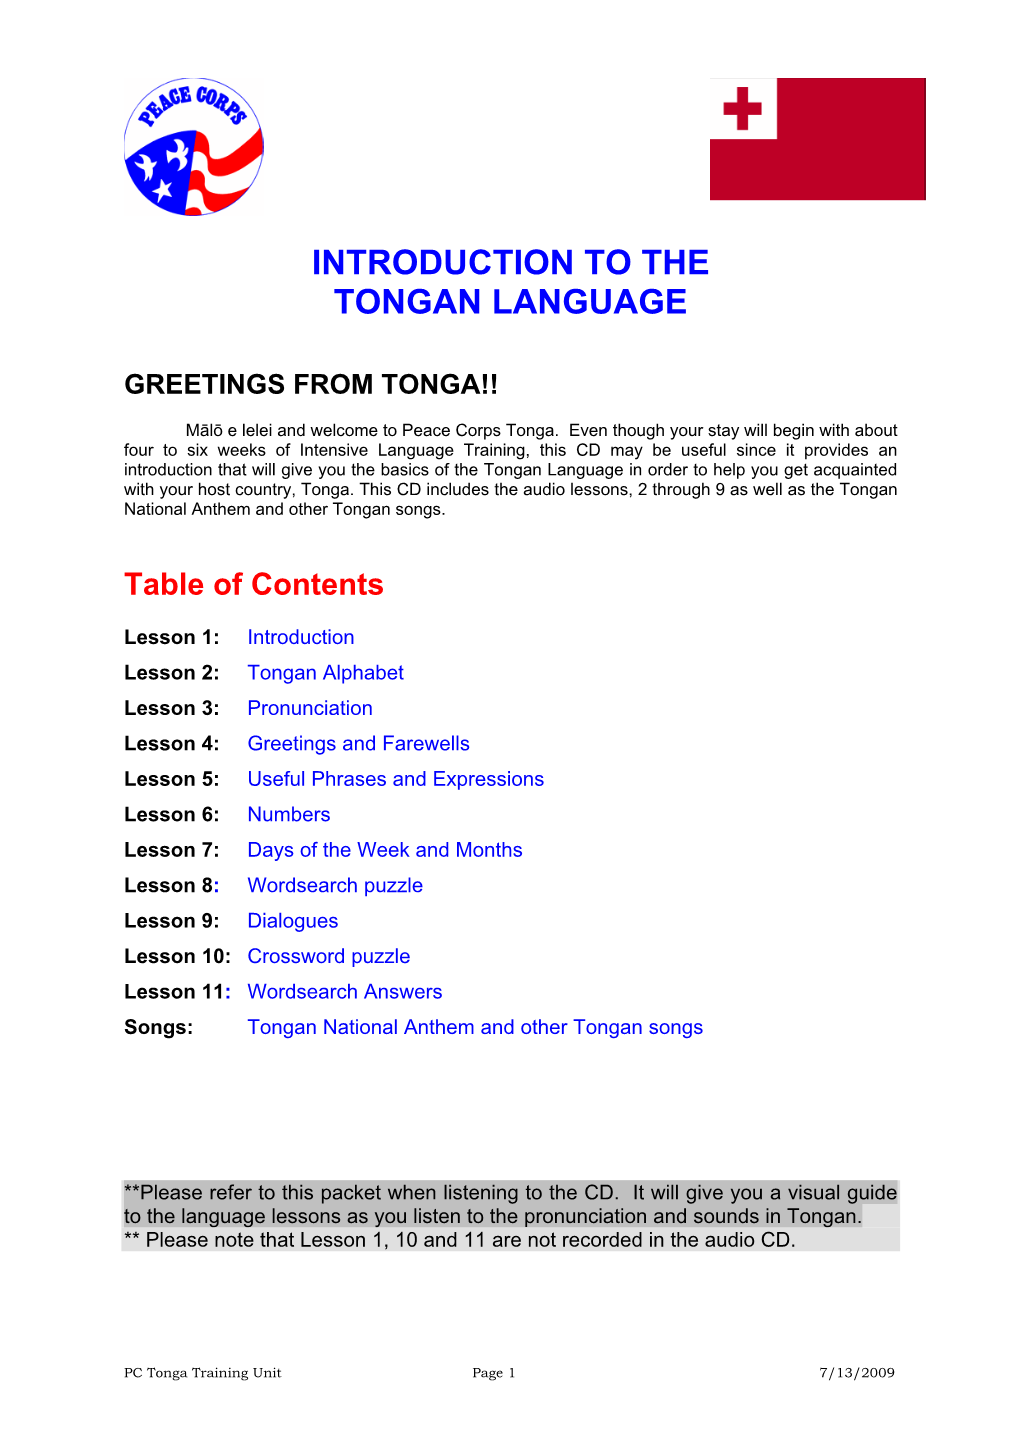 Introductory Material